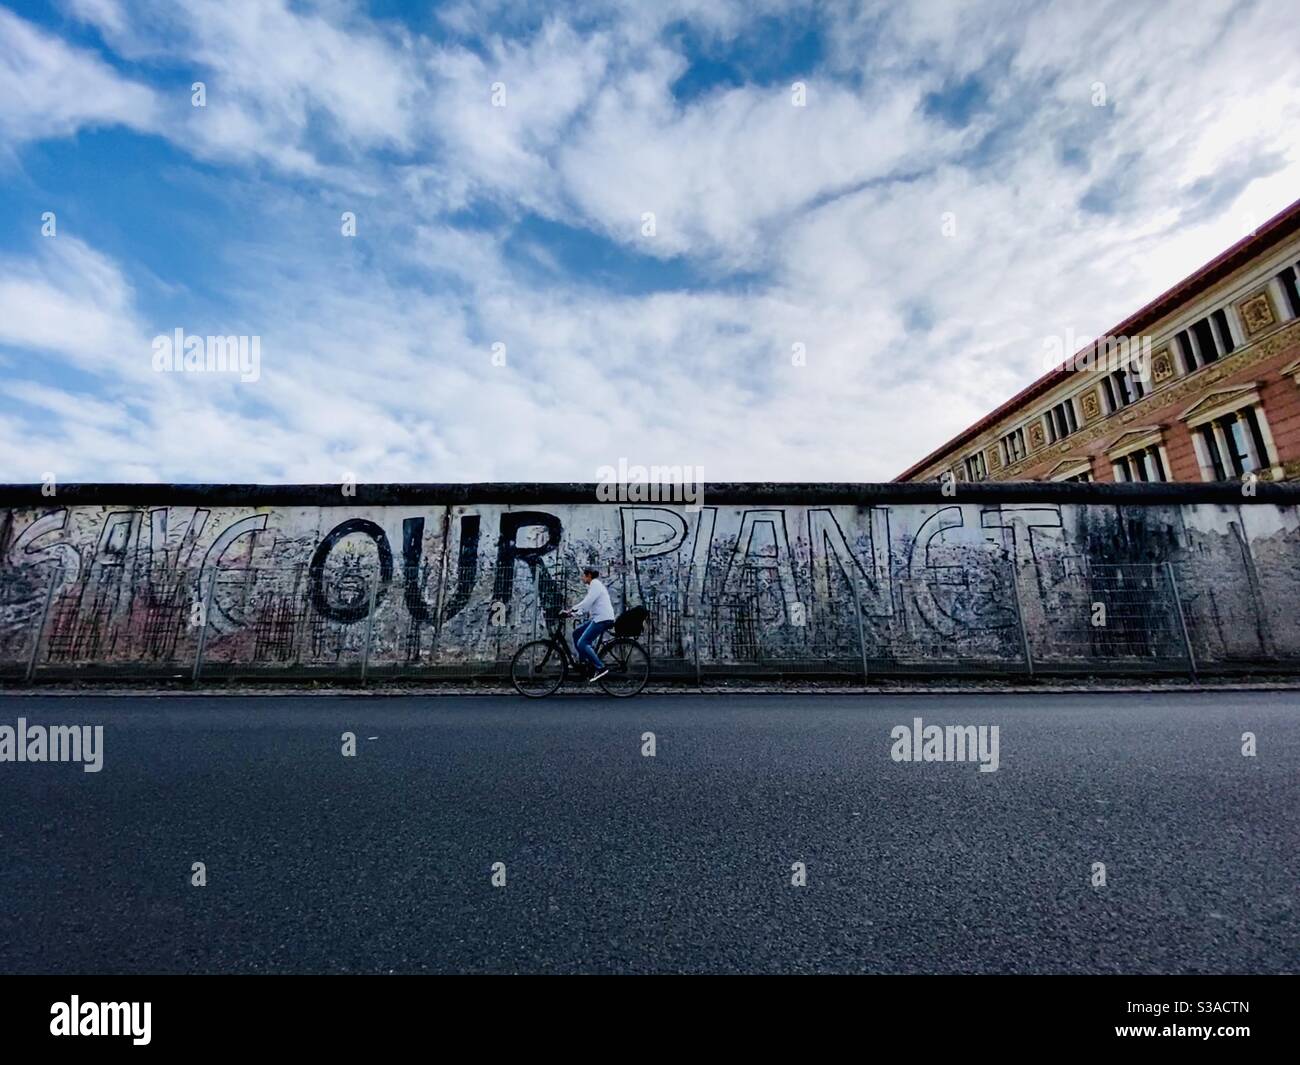 A woman rides her bike along a part of the Berlin Wall that is still remaining up. Graffiti on the wall reads “save our planet.”  Berlin, Germany. Stock Photo